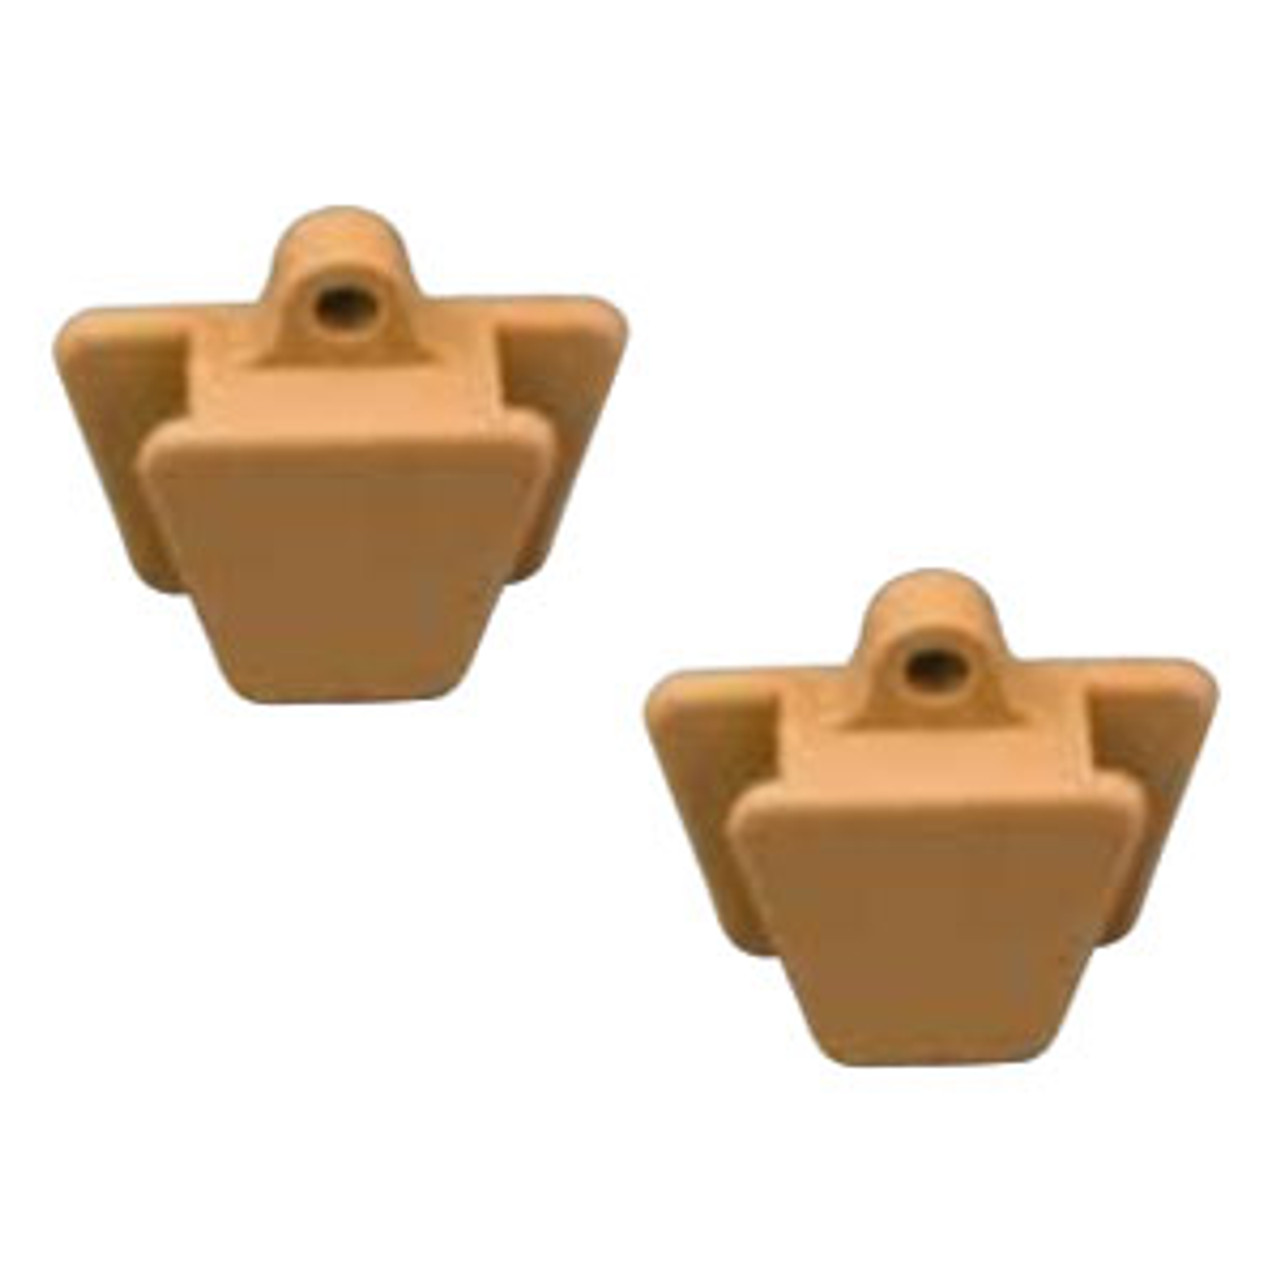 Miltex Silicon Rubber Mouth Props Tan - Adult, 2/bx